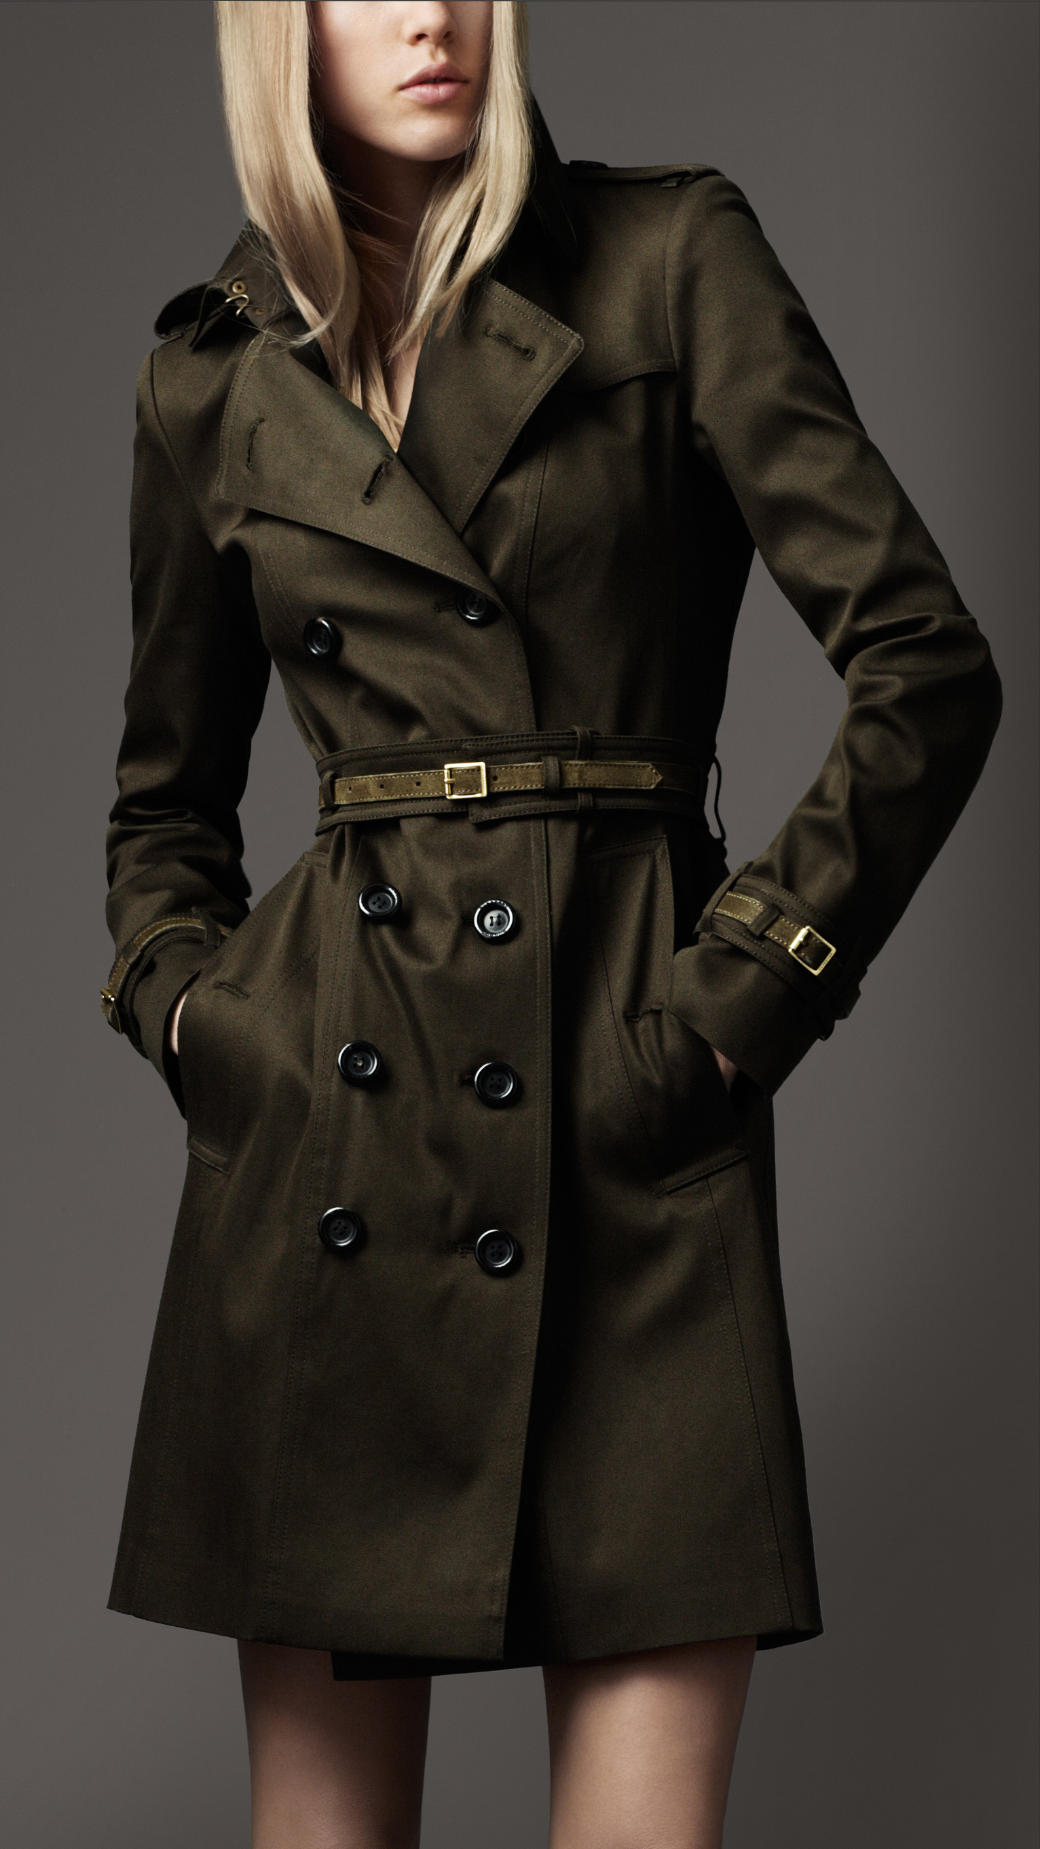 Lyst - Burberry Suede Trim Trench Coat in Green